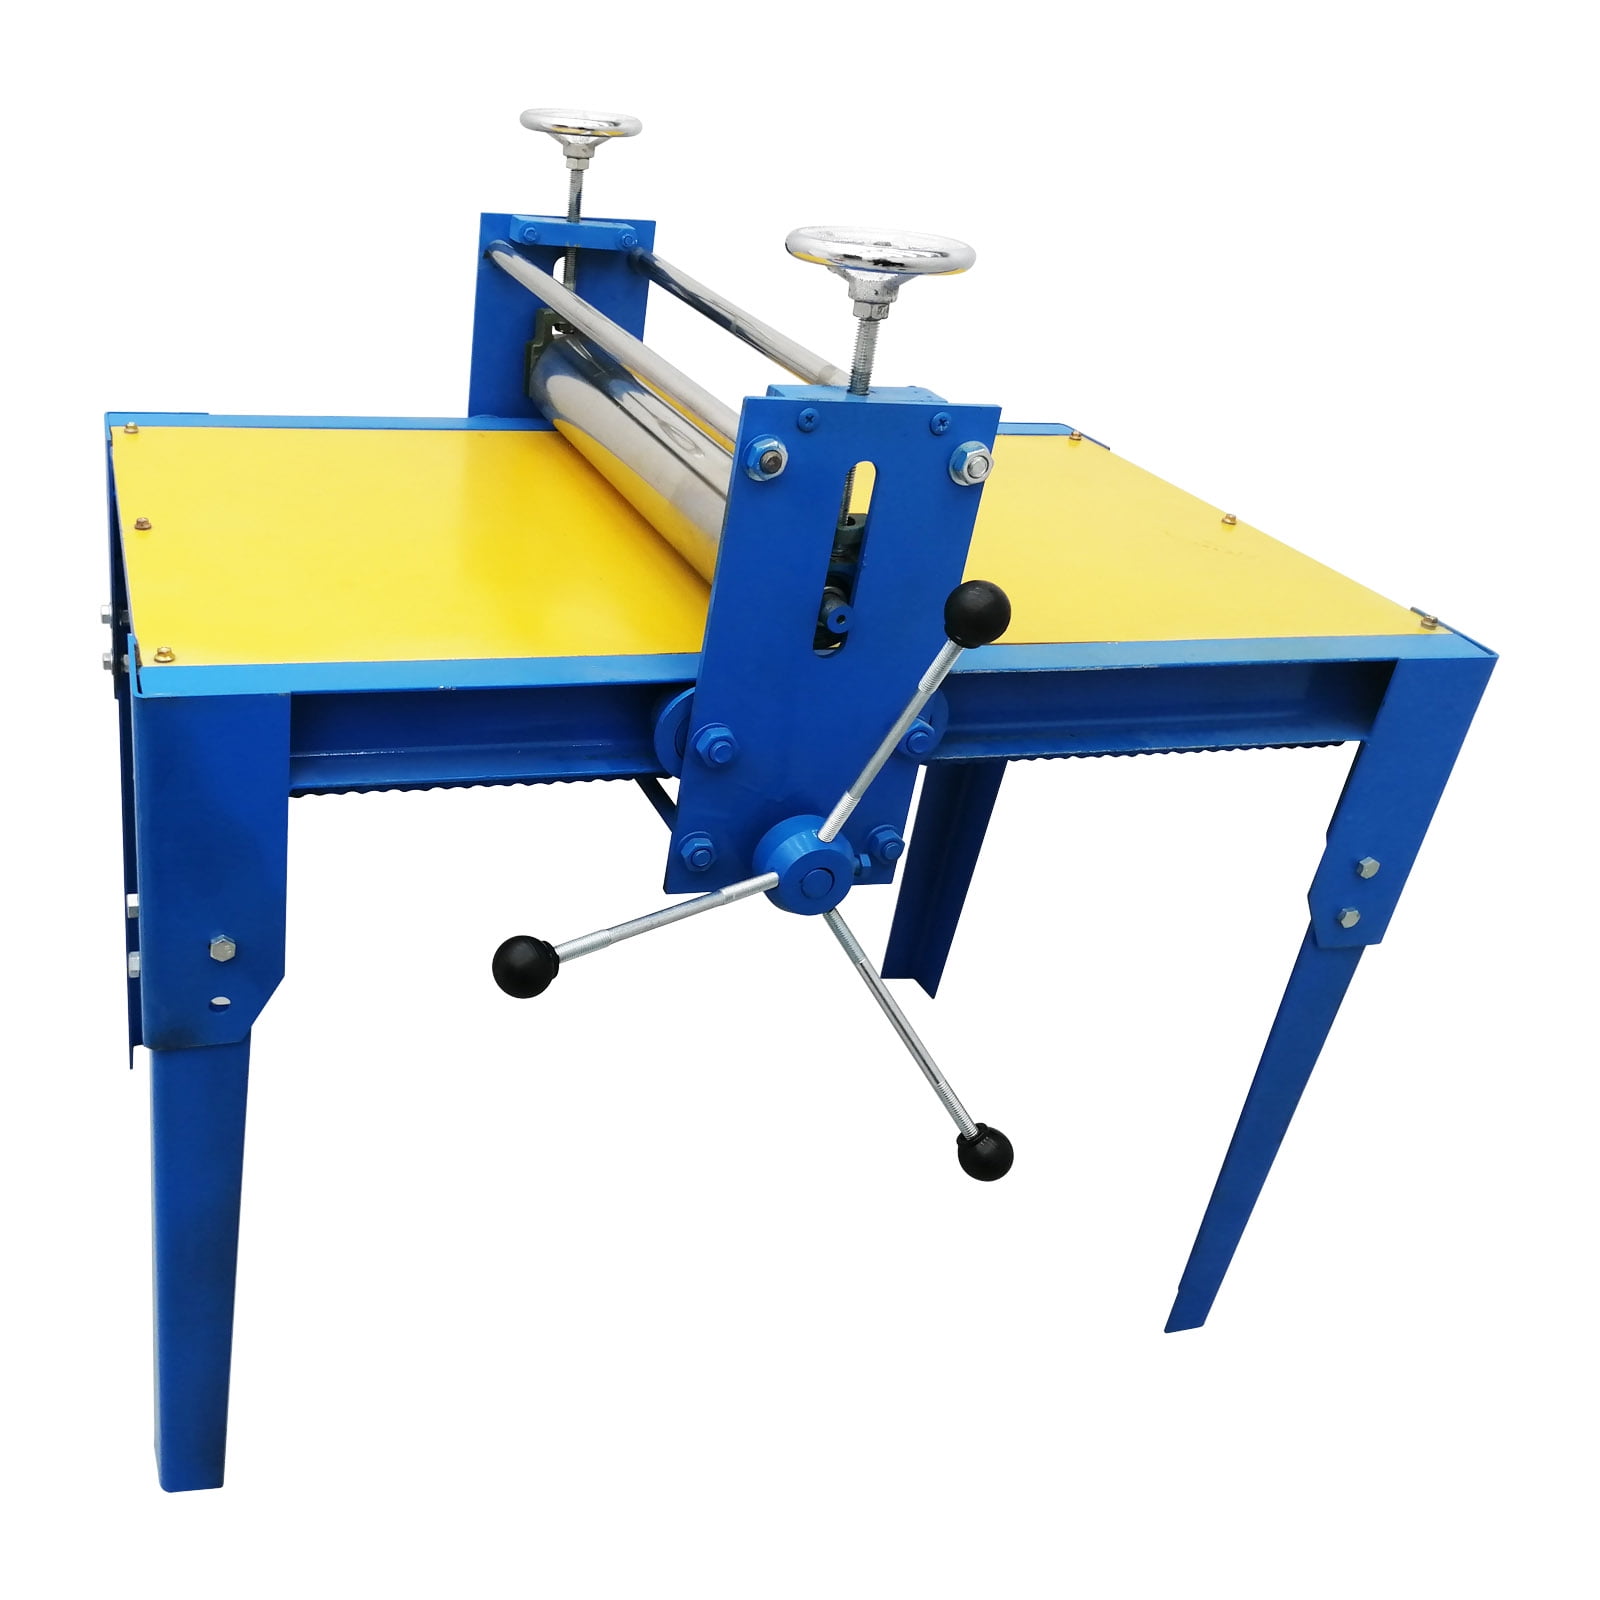  LGXEnzhuo Manual Ceramic Clay Plate Machine Slab Roller for Clay  Heavy Duty Tabletop Ceramic Work Clay Art Craft Adjustable Thickness No  Shims 27.5x17.7Inch Working Table : 藝術、手工藝與縫紉